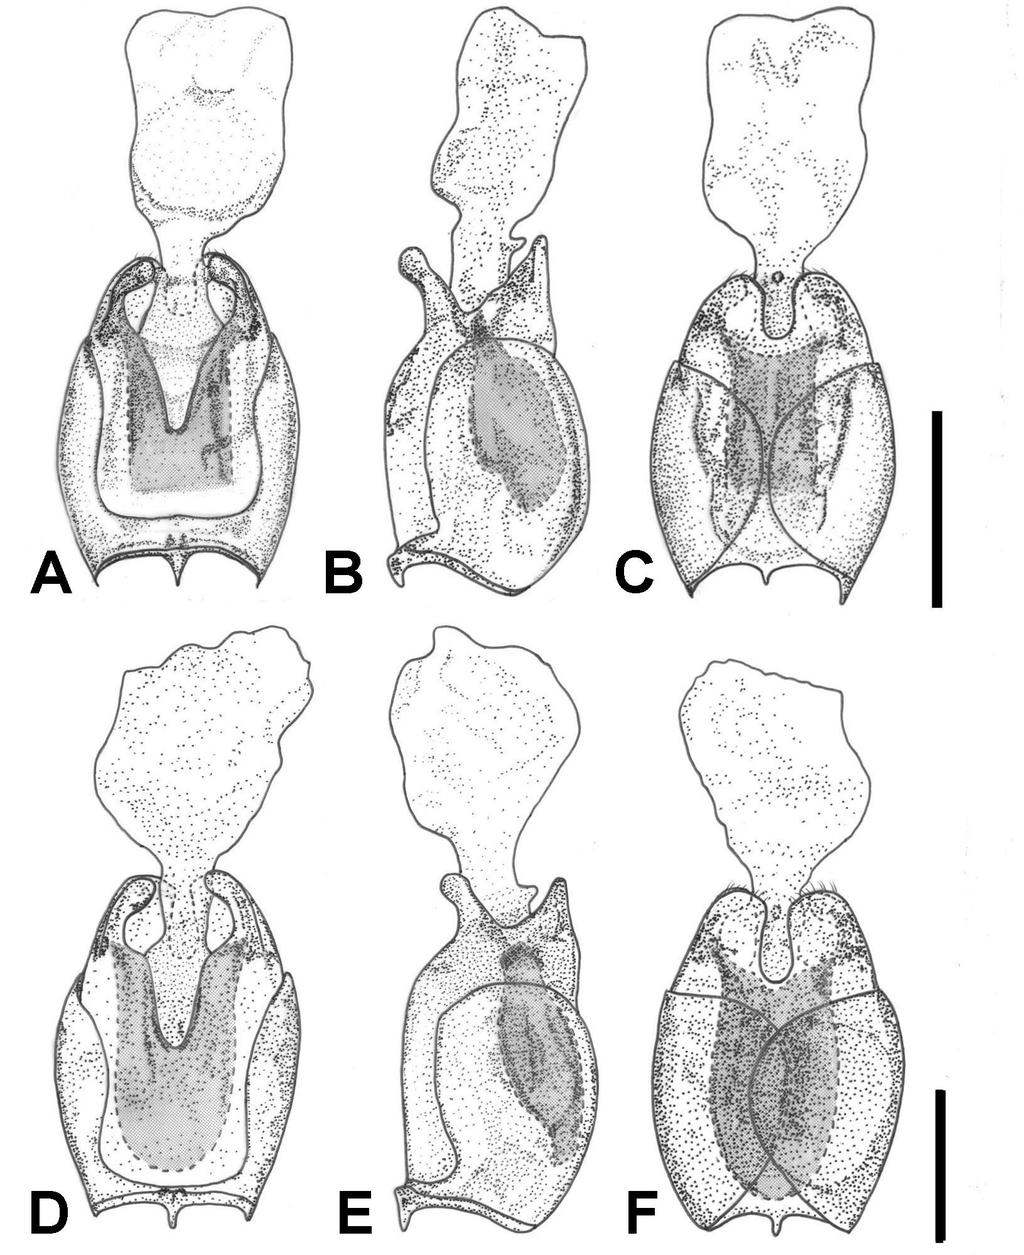 HSIAO Y. et al., Revision of the Lycocerus hanatanii species group Fig. 5. Aedeagus. A C. Lycocerus evangelium Hsiao & Okushima sp.